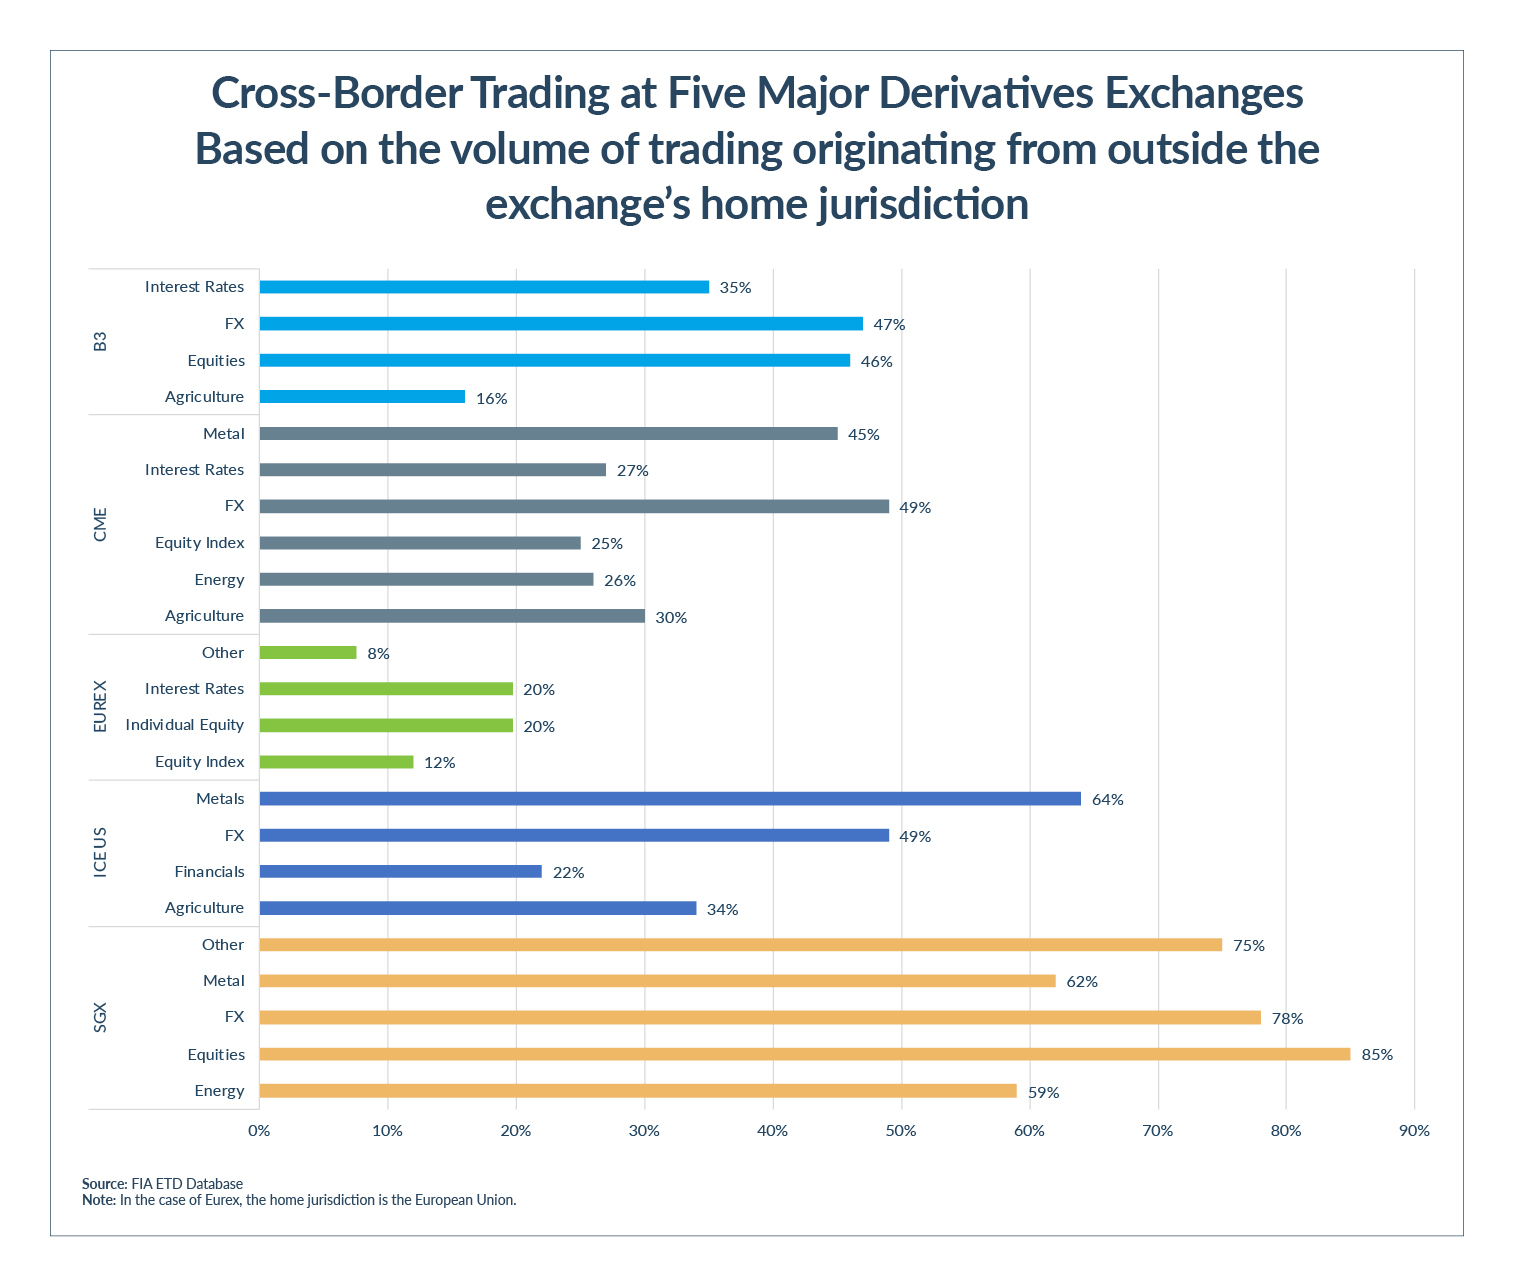 Cross-Border Trading at Five Major Derivatives Exchanges